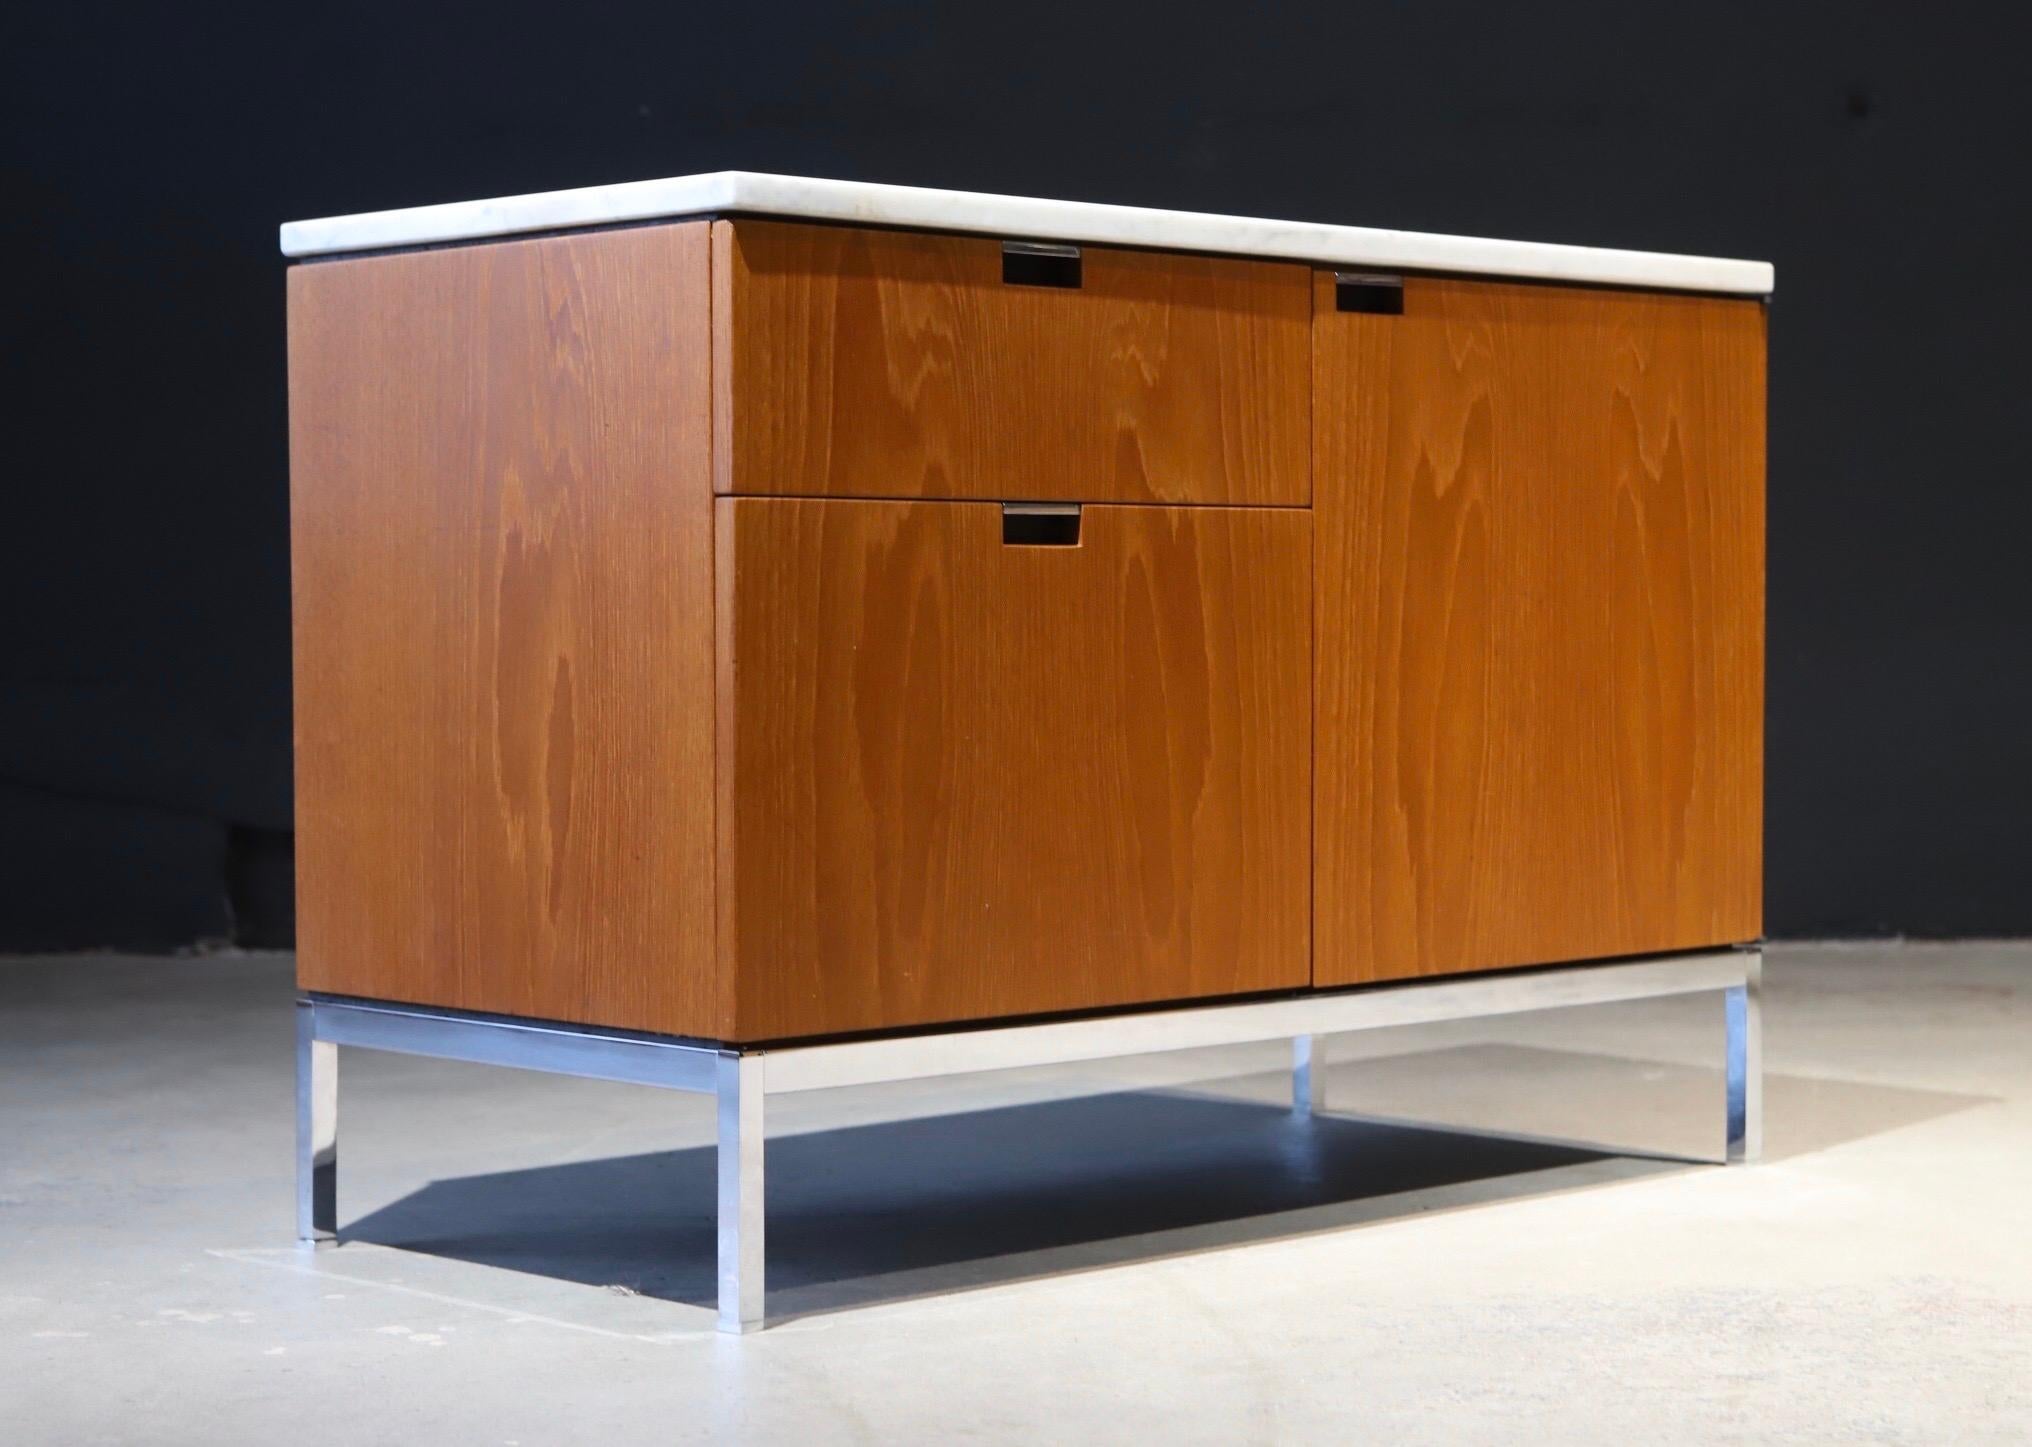 Simplicity in design. A stunning small credenza designed by Florence Knoll for Knoll. Featuring a marble top, chrome base and plenty of storage. Retains all four square metal leveling glides and pen drawer. Pictured with larger Knoll credenza and